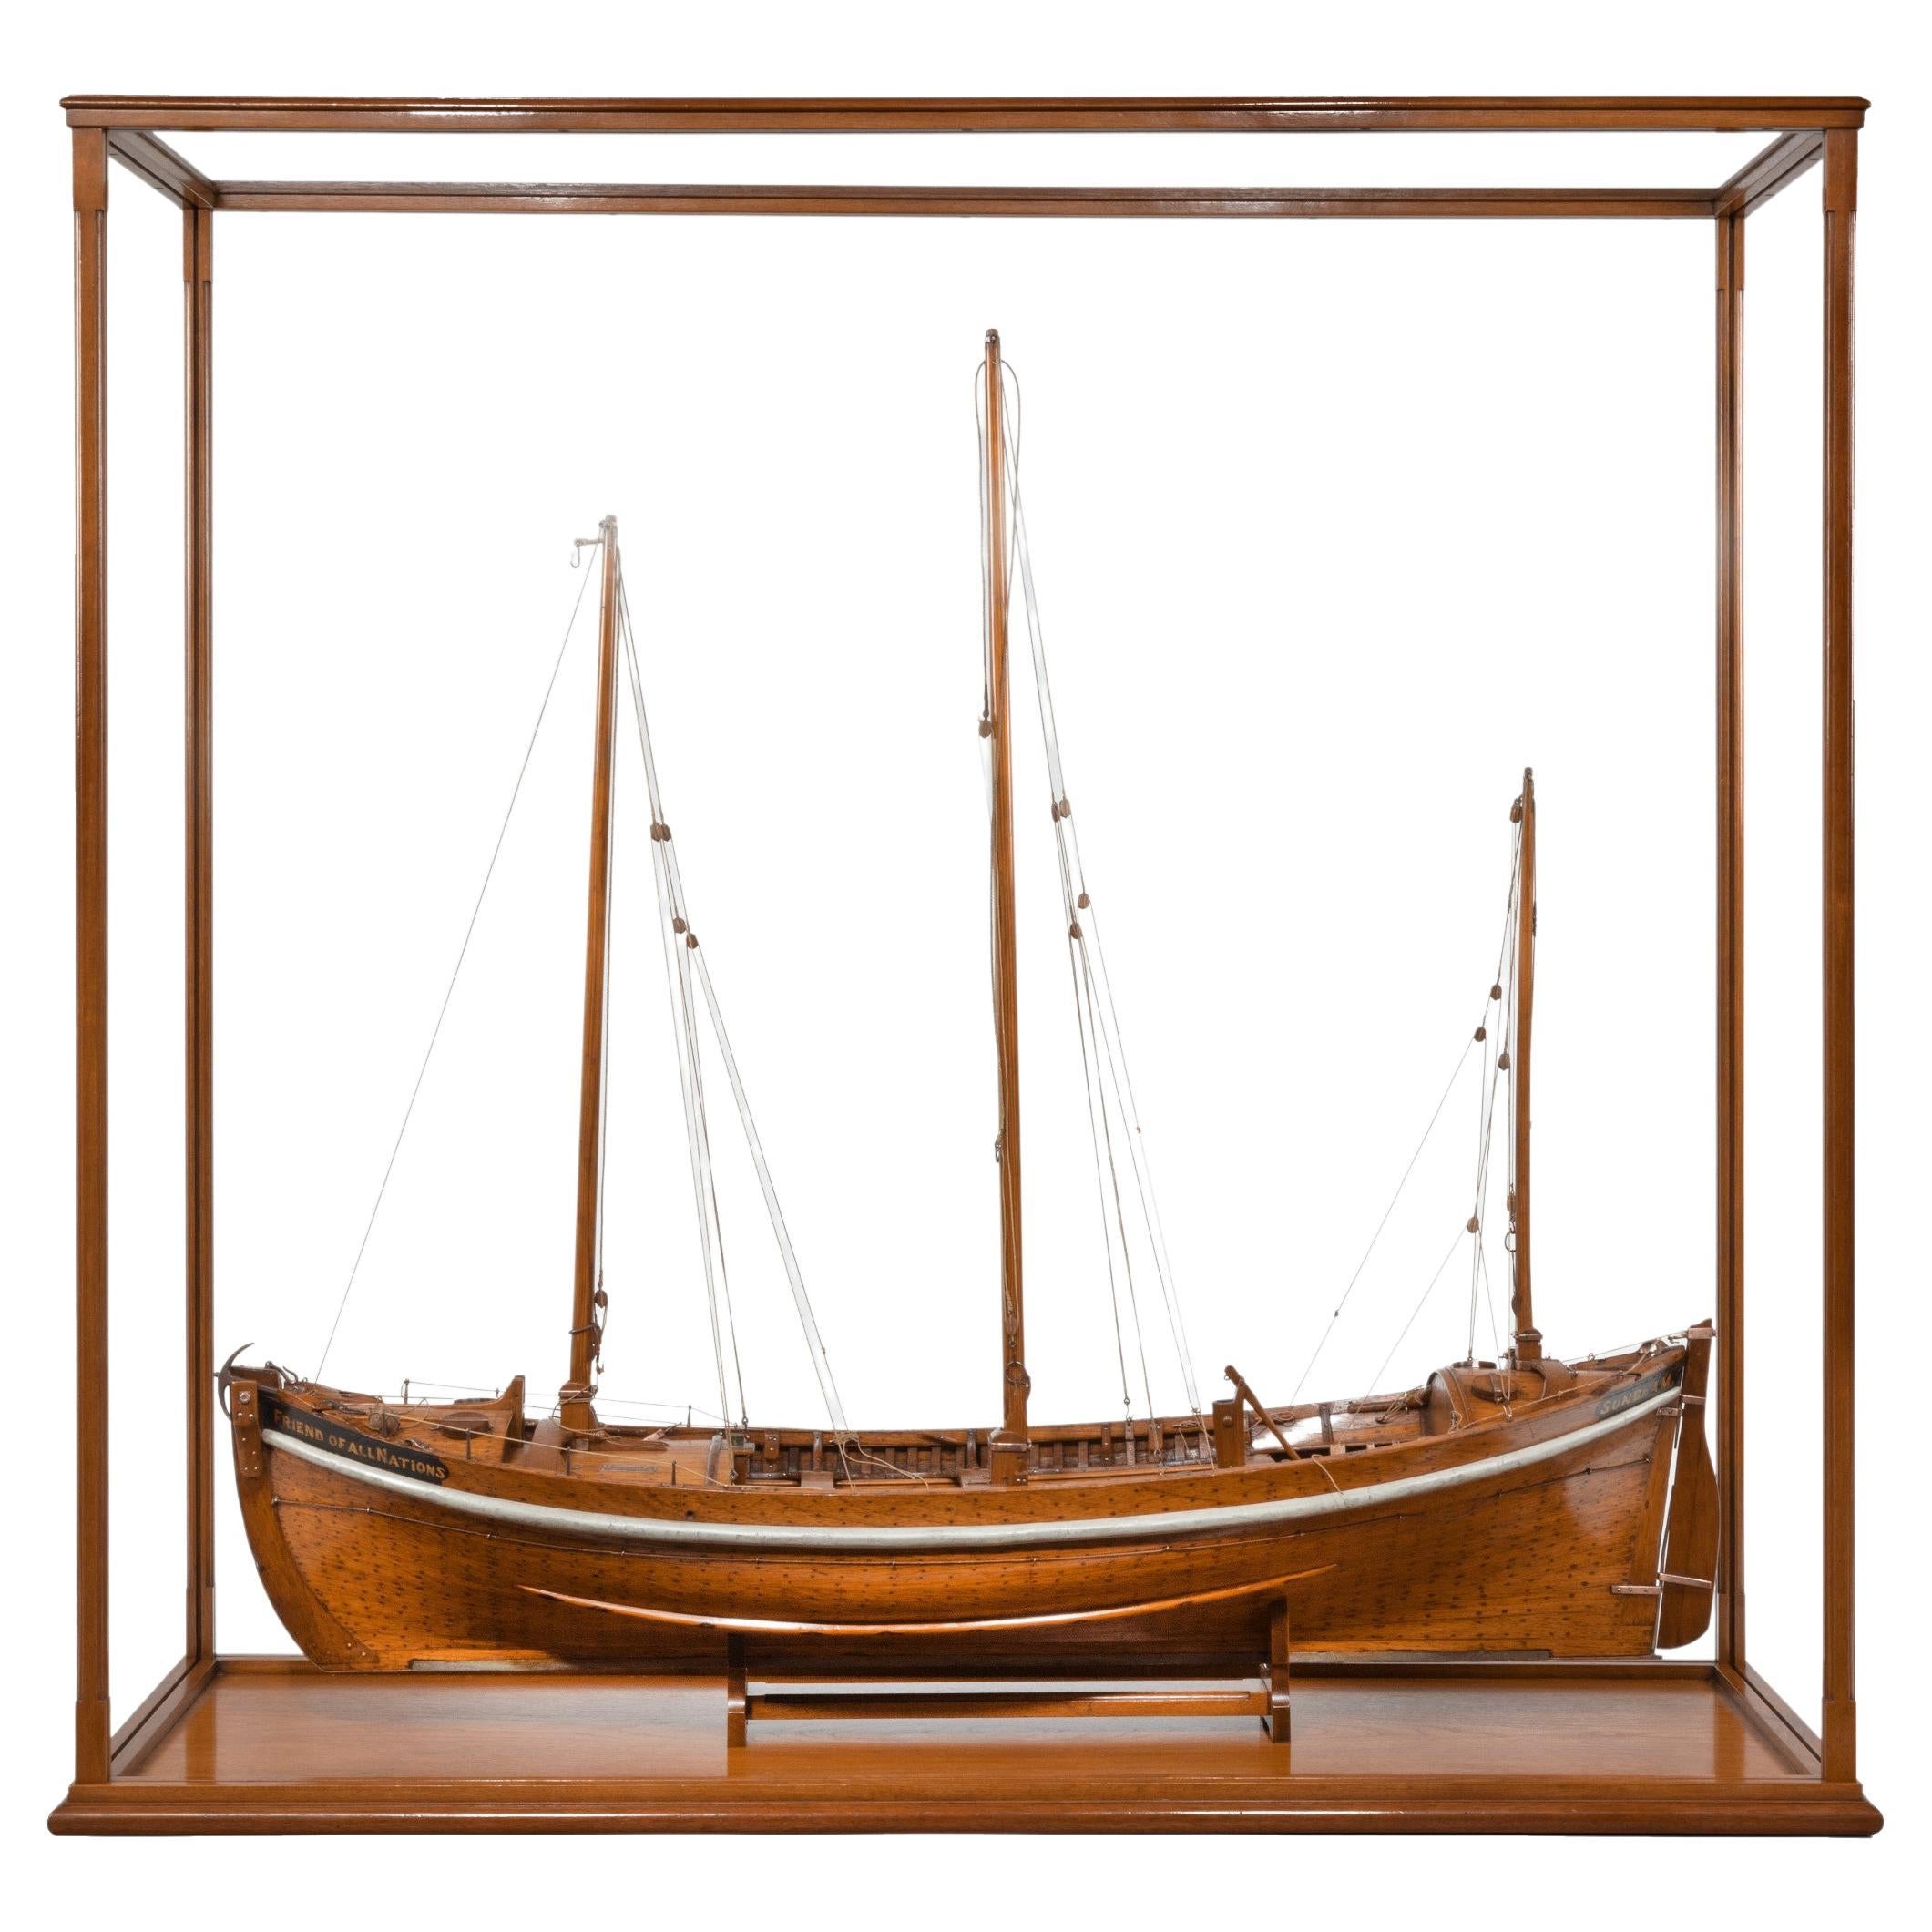 Lugger Lifeboat Model by Twyman for the International Exhibition, London, 1862